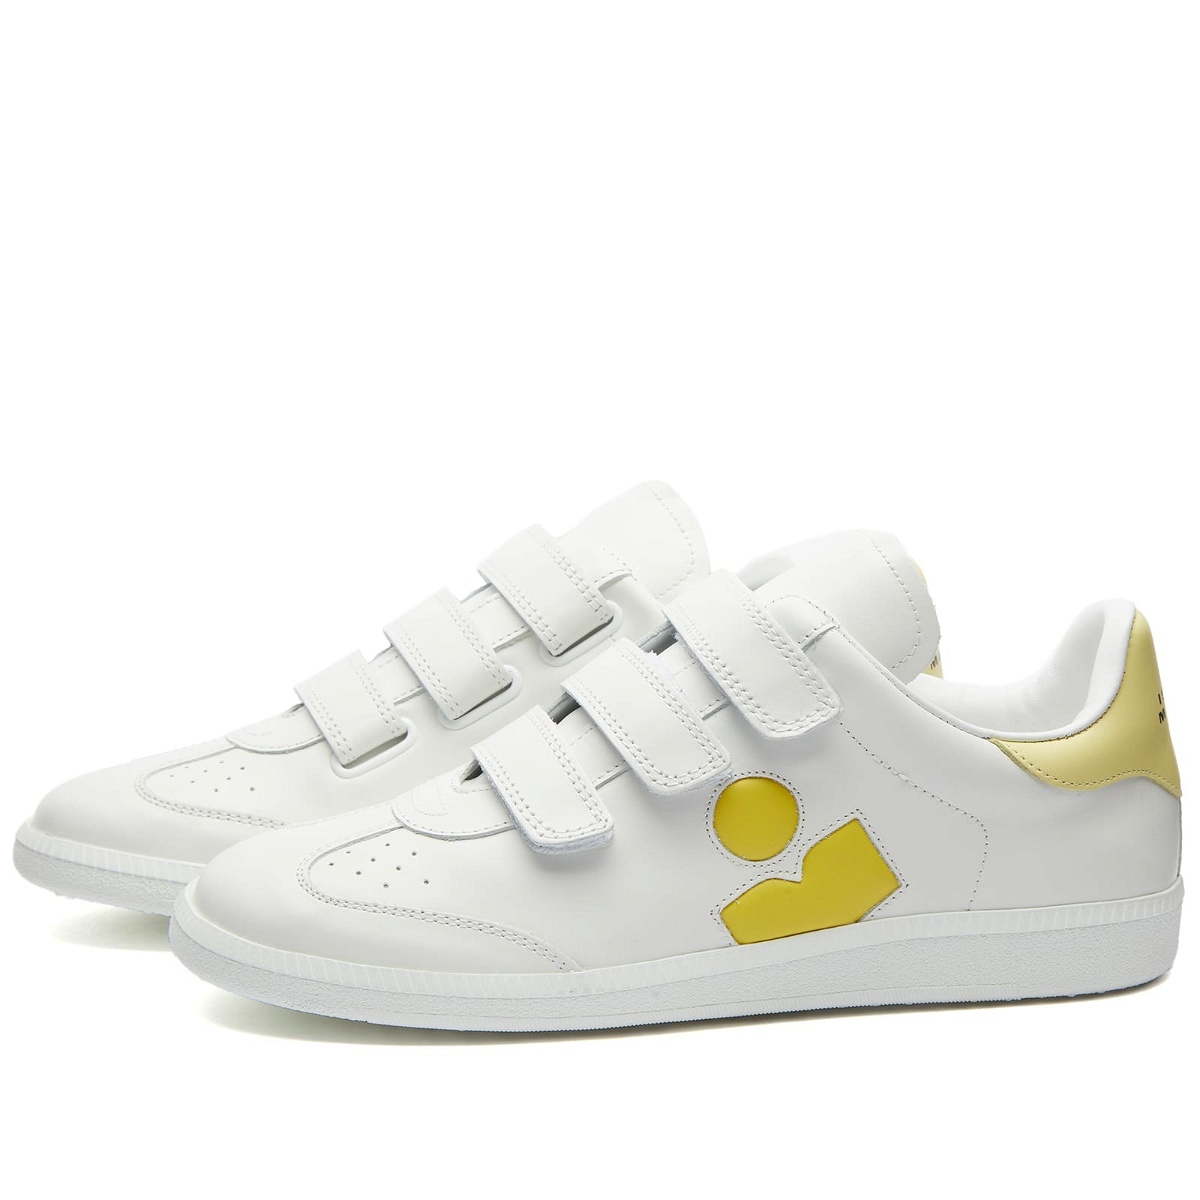 Photo: Isabel Marant Étoile Women's Isabel Marant Beth Sneakers in White/Yellow